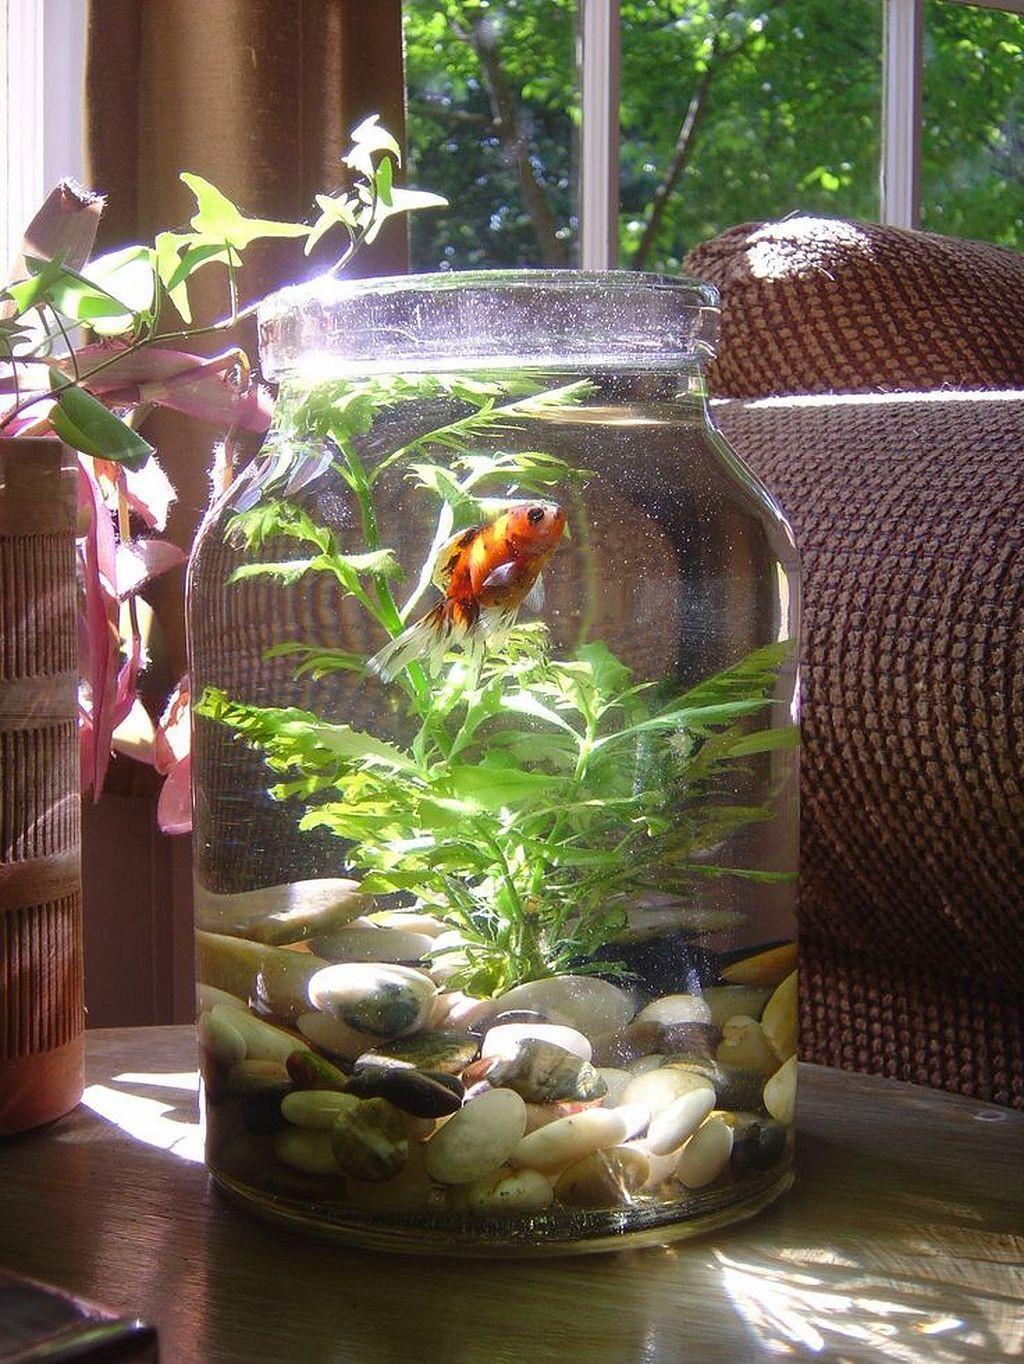 live plants for betta fish vase of gorgeous 30 awesome fish tank ideas https gardenmagz com 30 in gorgeous 30 awesome fish tank ideas https gardenmagz com 30